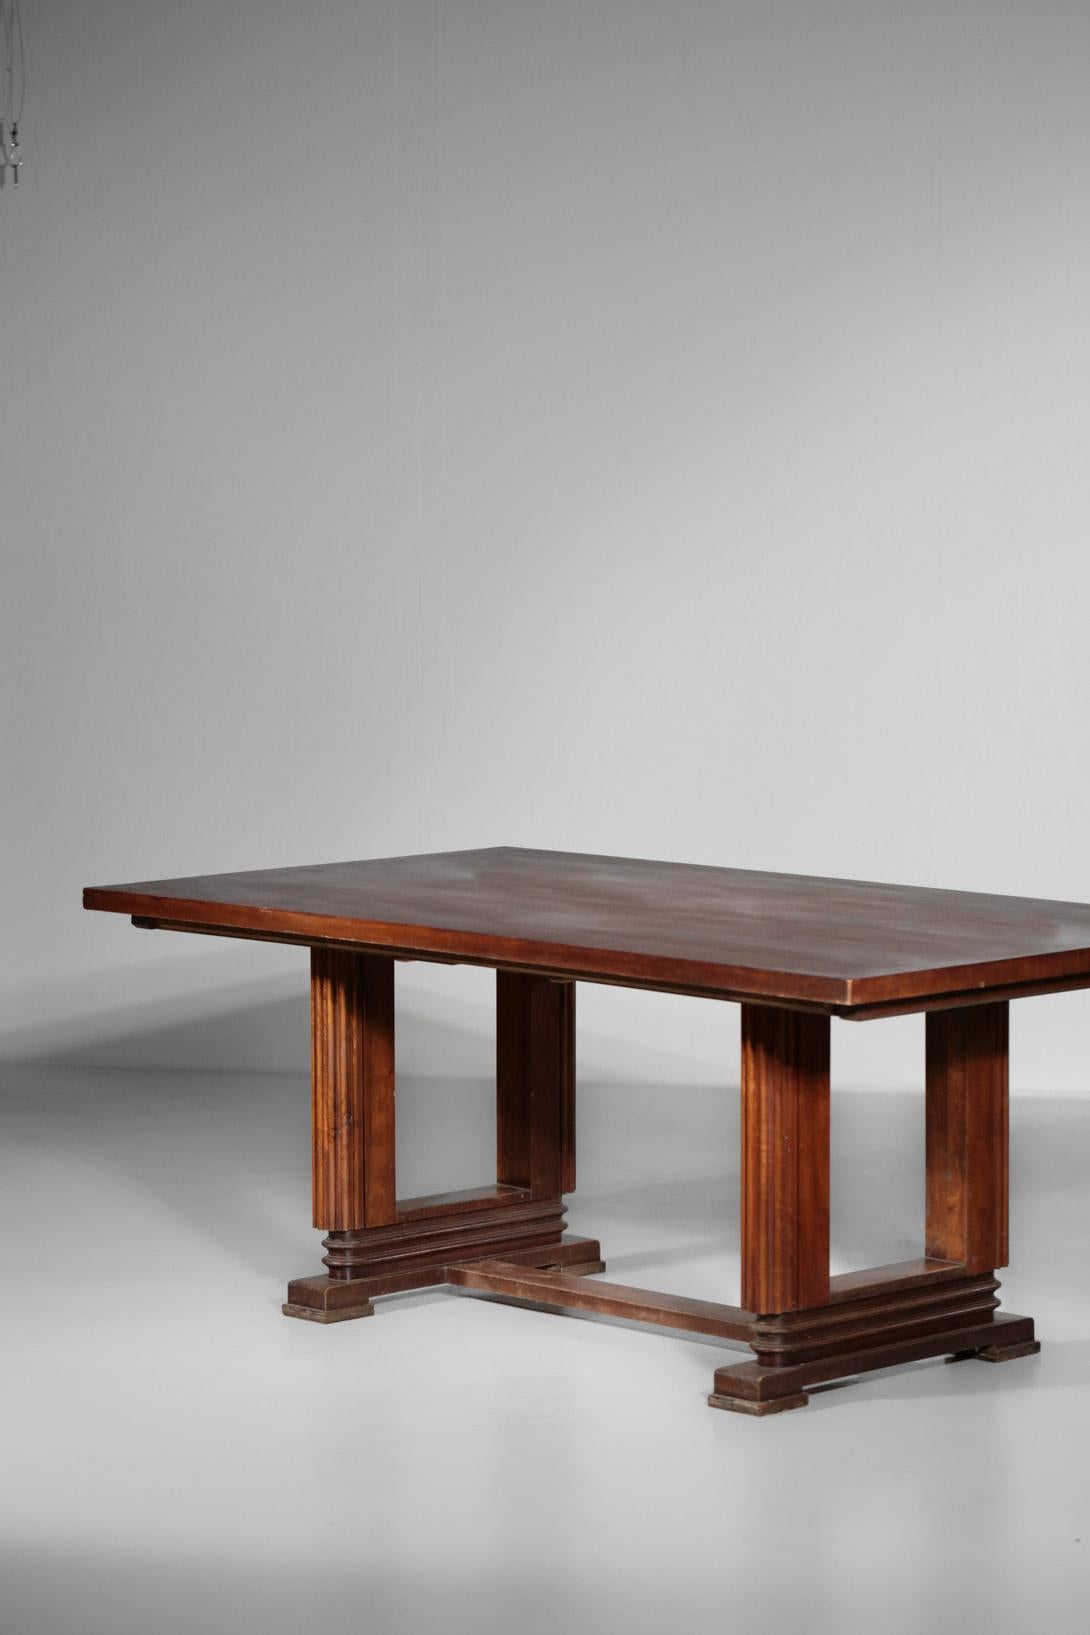 French Dining Table Maxime Old Style Mahogany Art Deco In Excellent Condition For Sale In Ternay, Auvergne-Rhône-Alpes